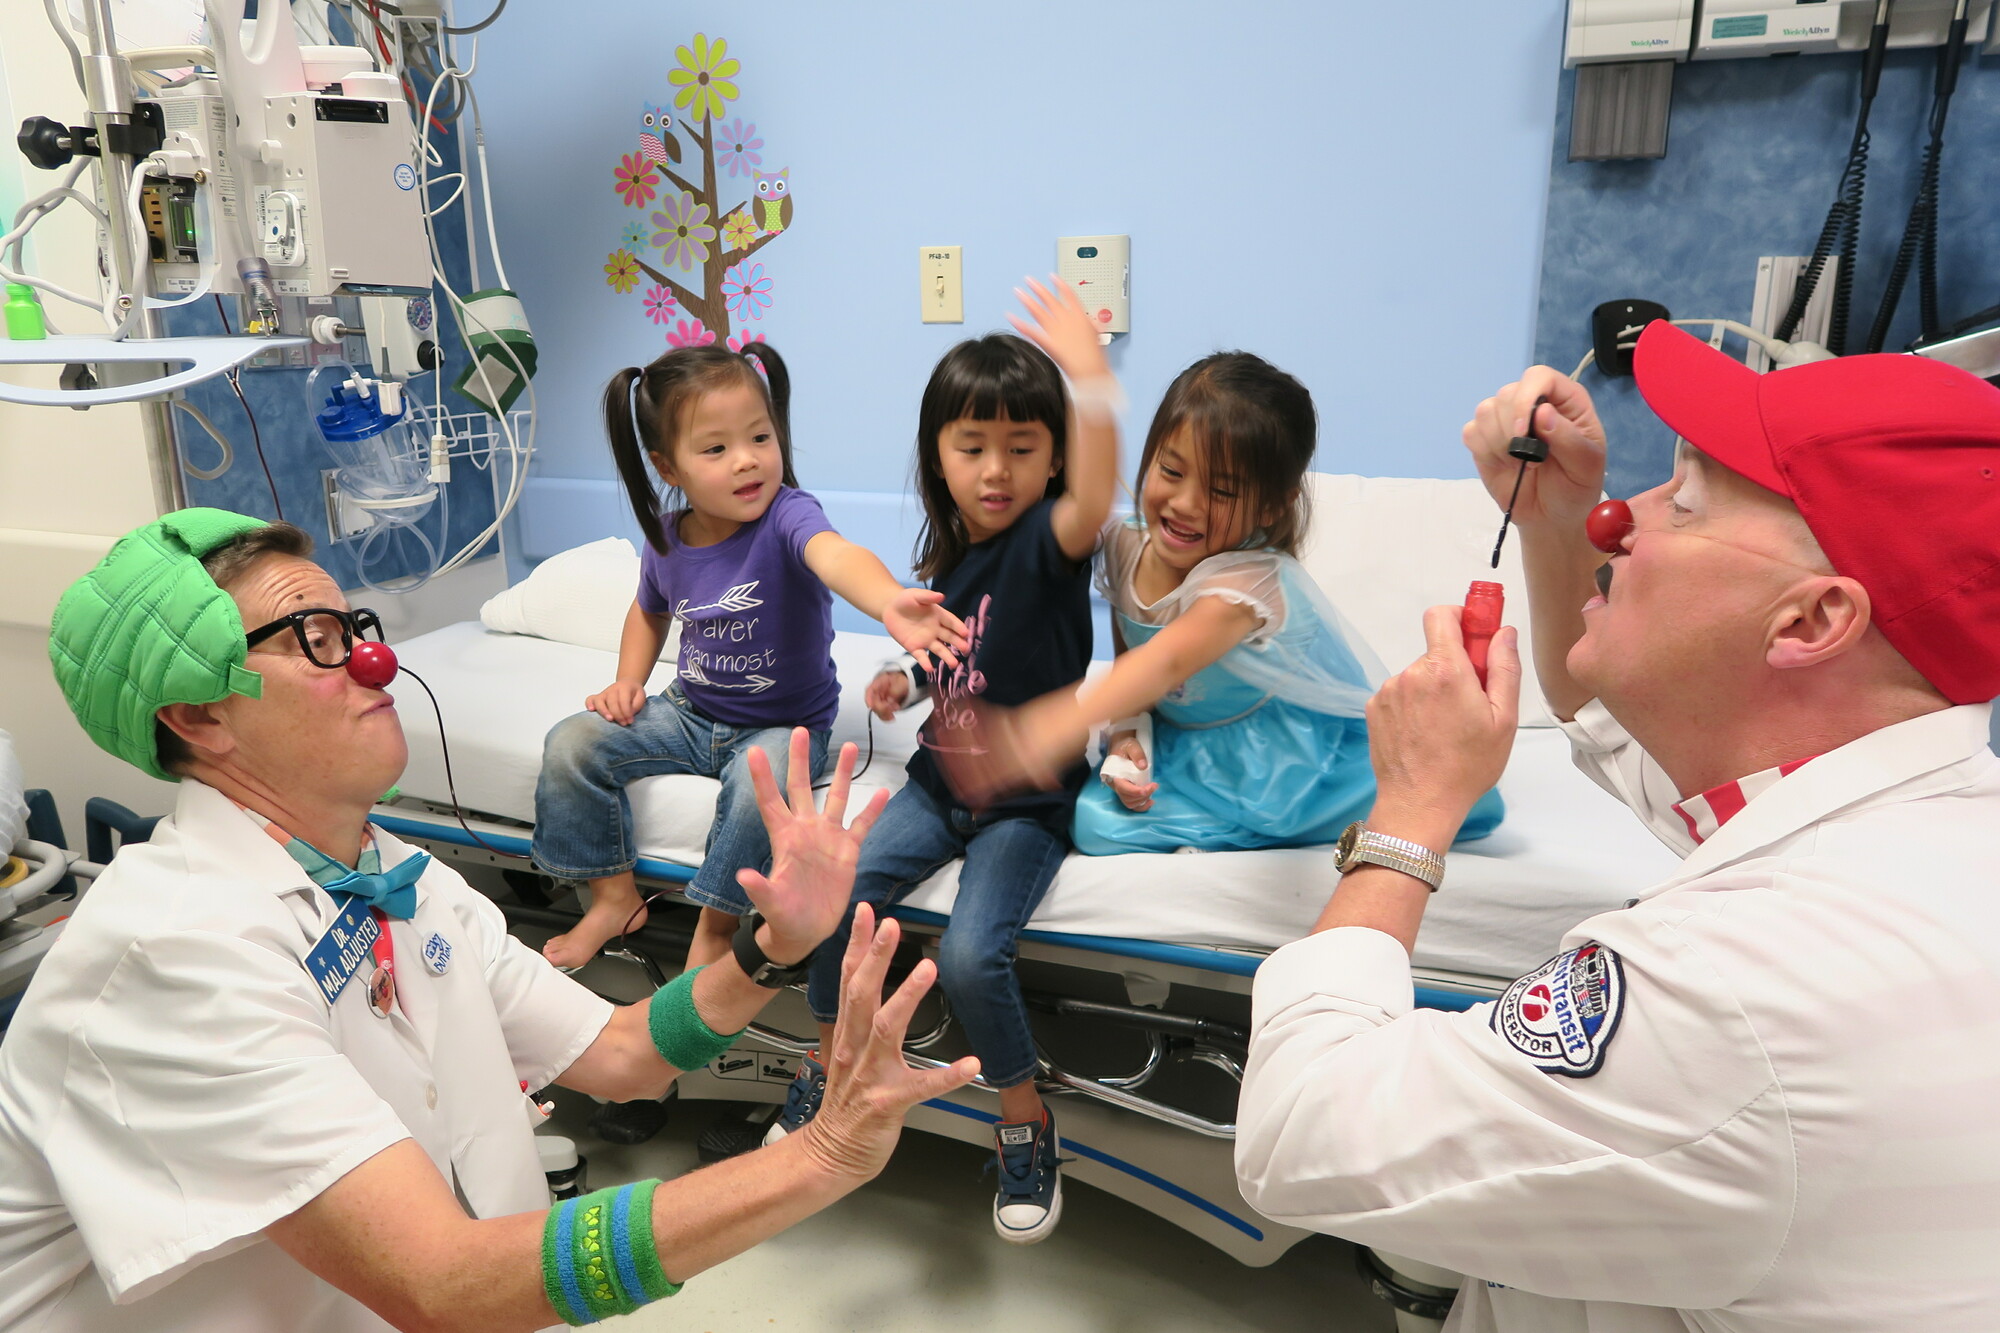 Two clowns entertaining three children in a hospital room.